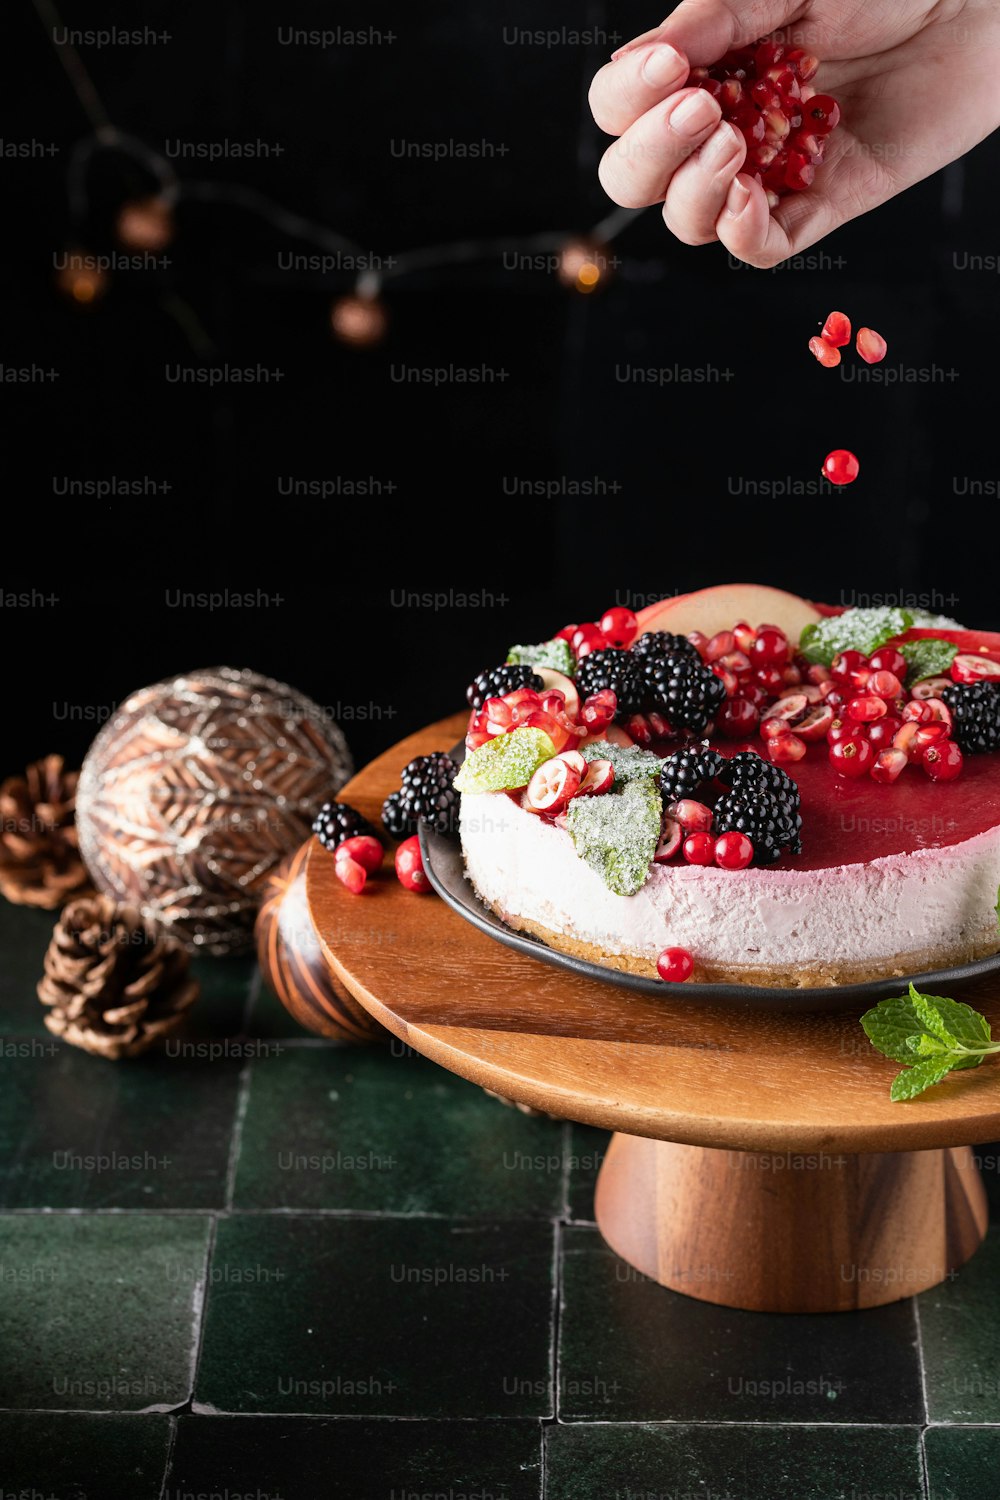 a person is sprinkling berries on a cake